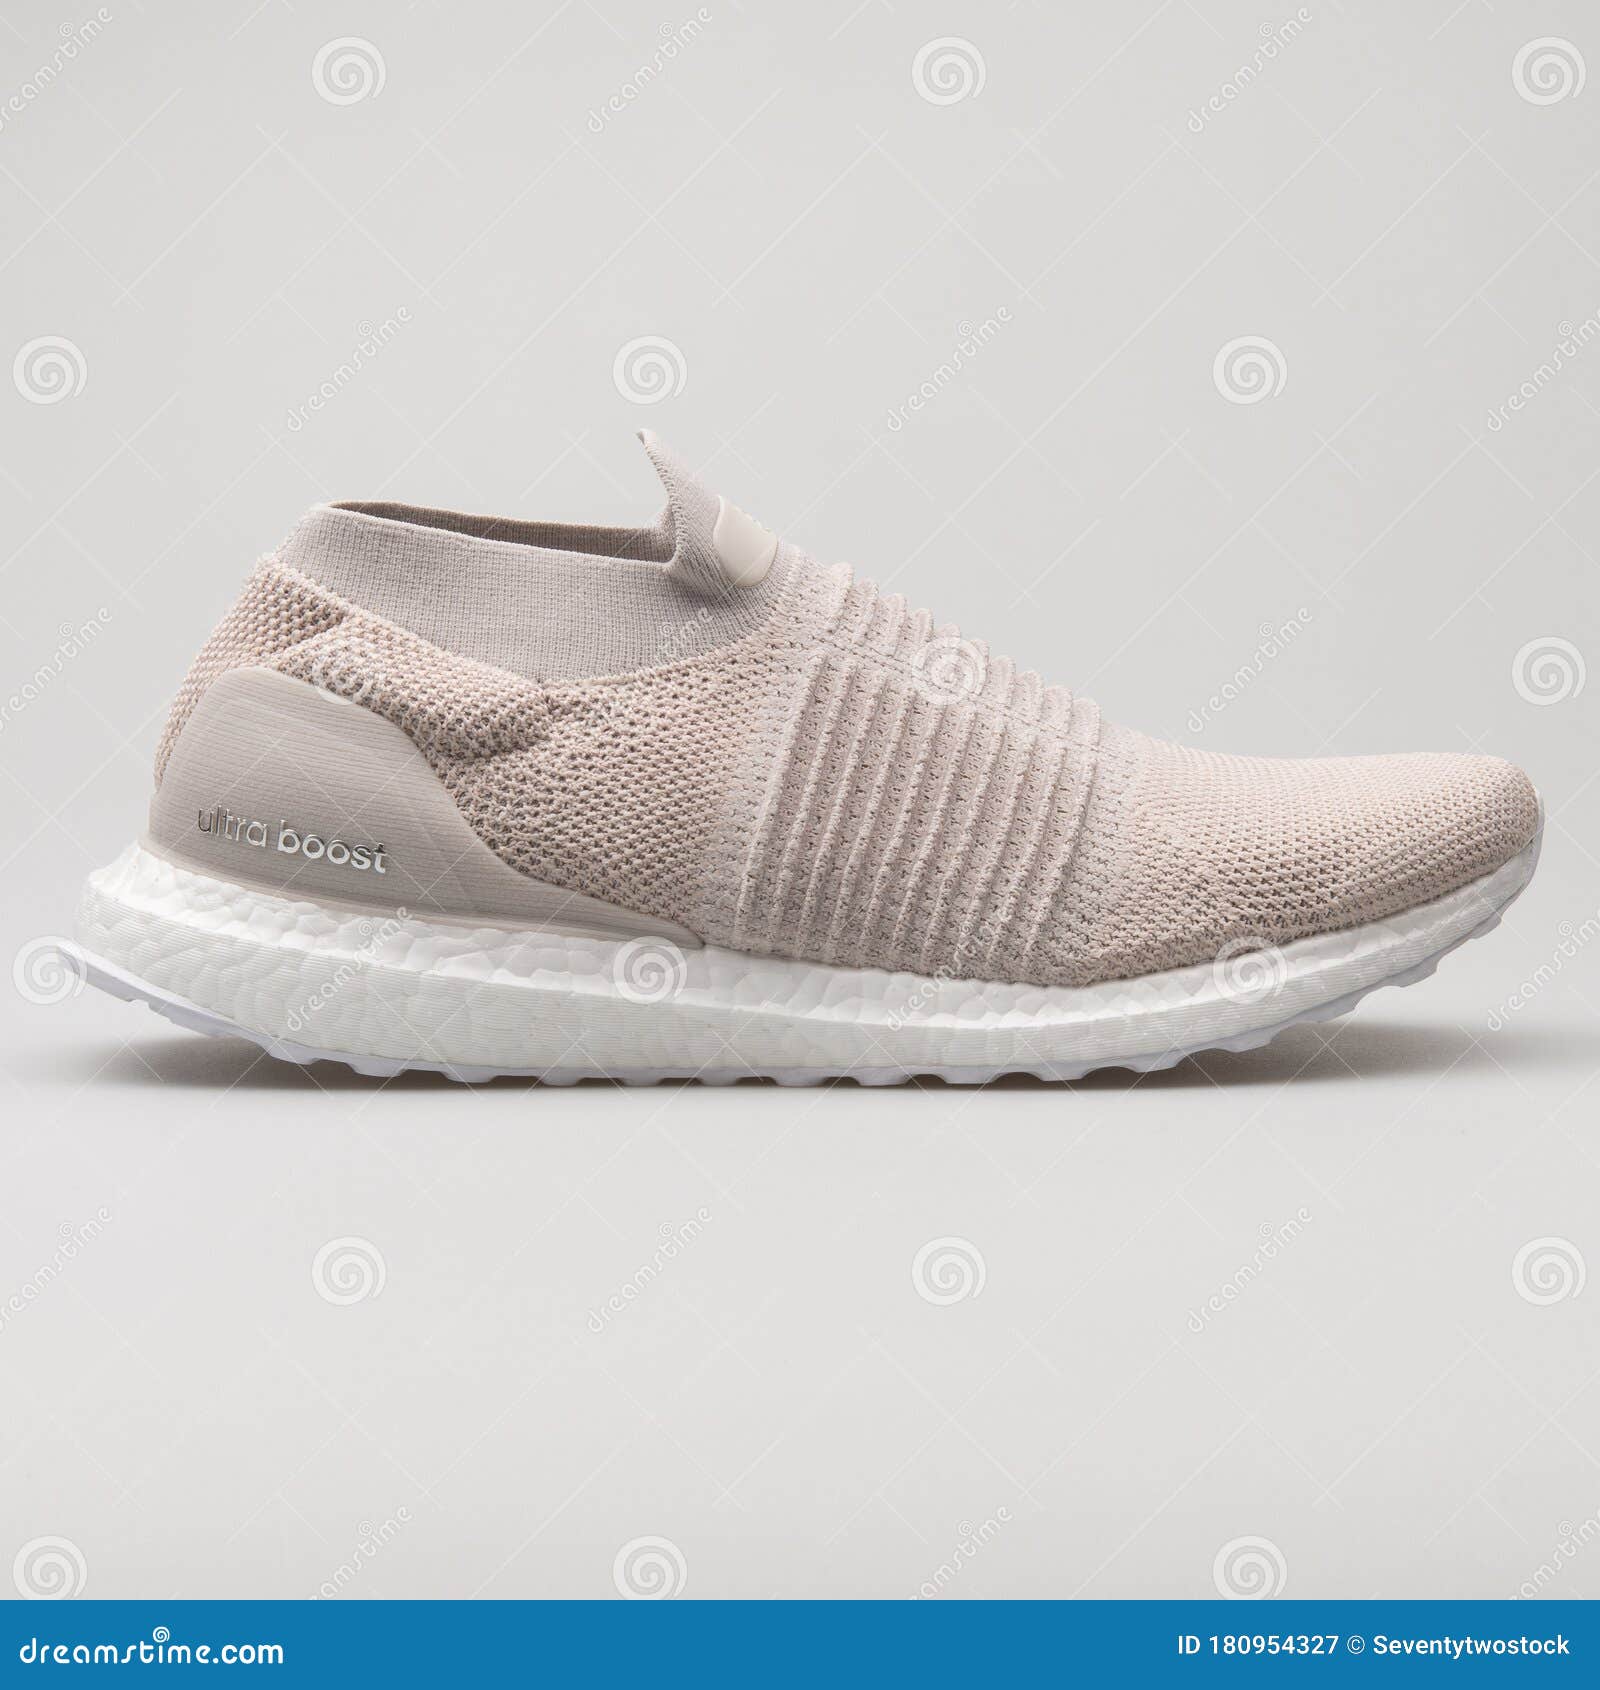 Adidas Ultra Laceless Beige Sneaker Photography - Image casual, beige: 180954327